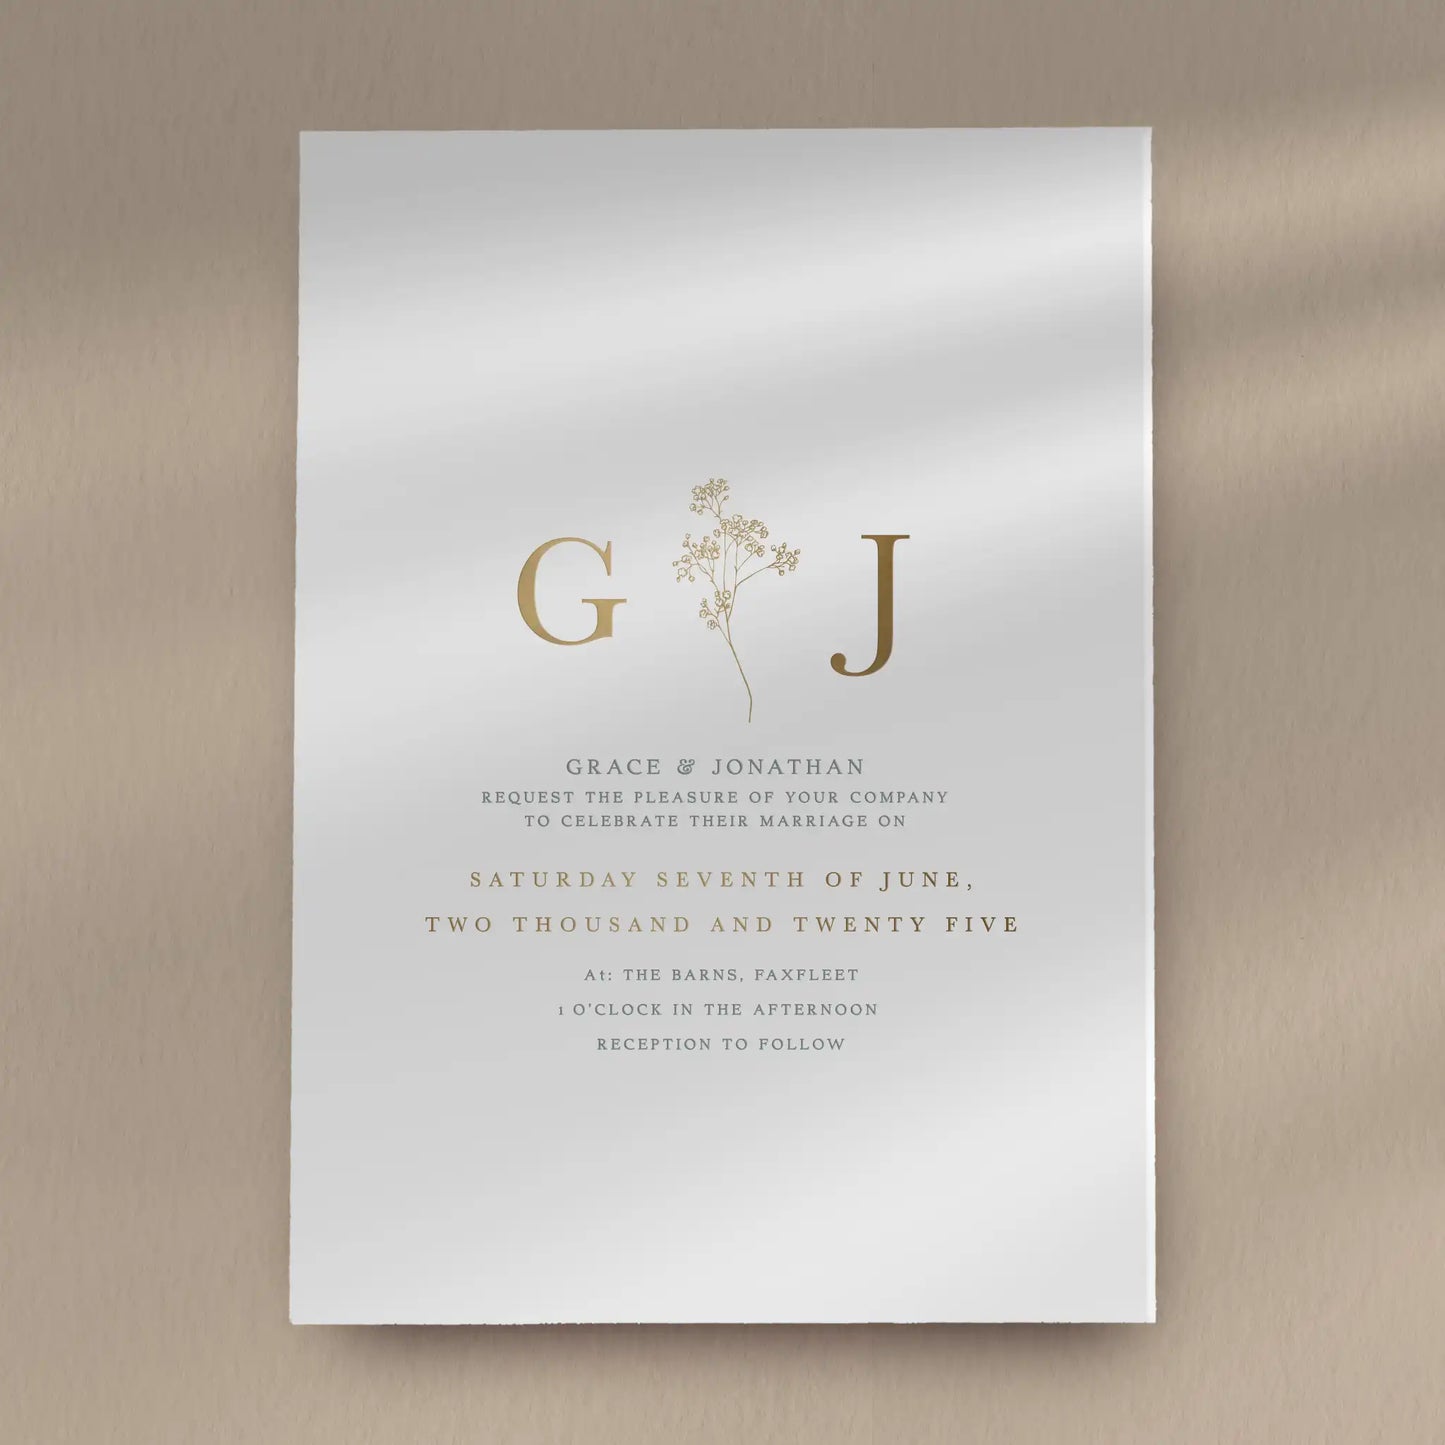 Day Invitation Sample  Ivy and Gold Wedding Stationery Grace  